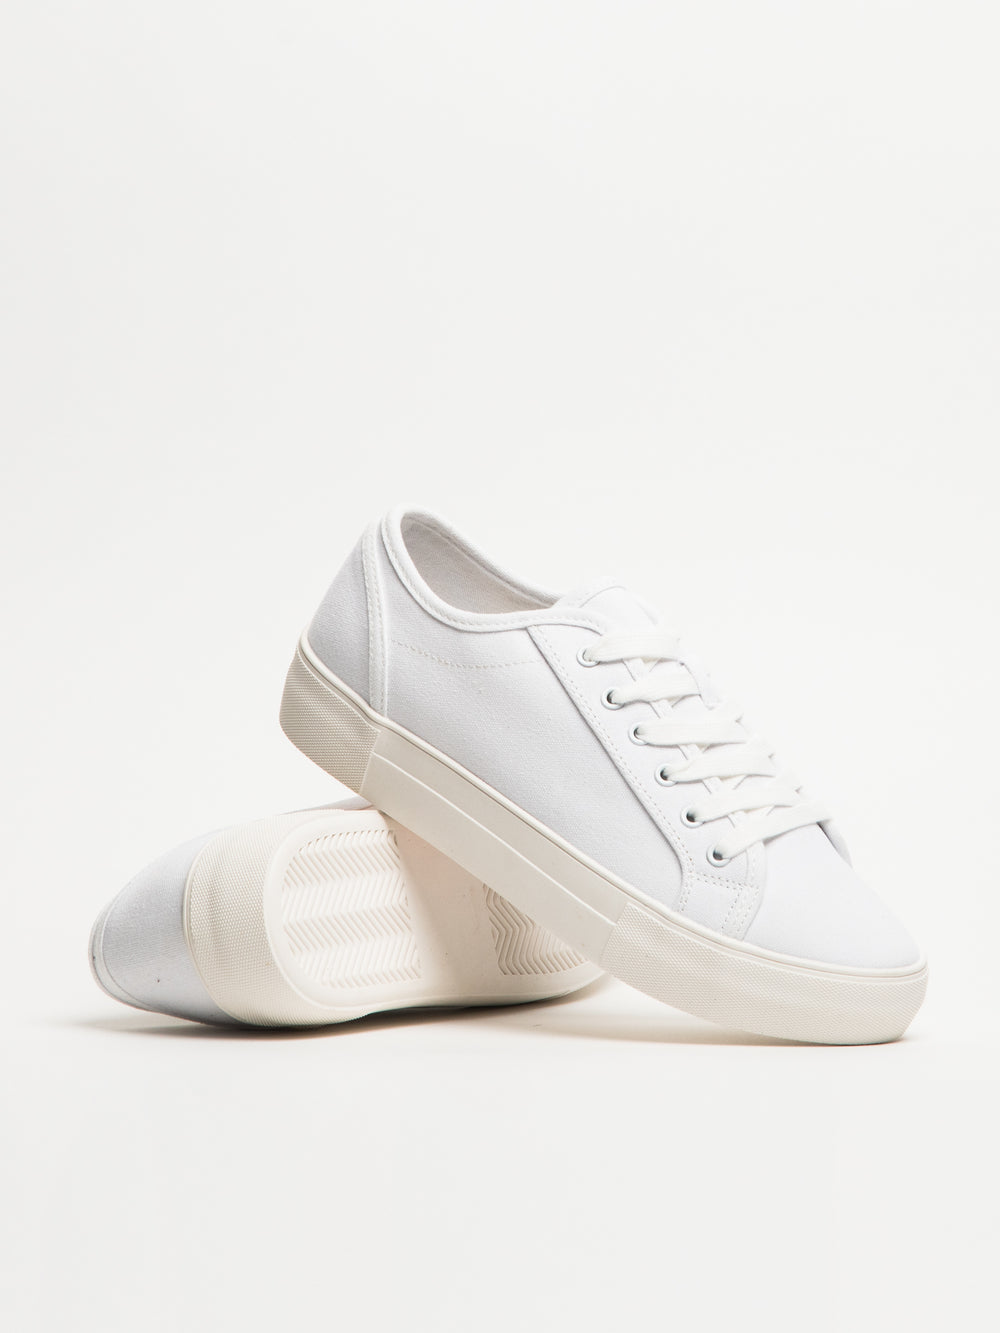 WOMENS DLG LILY  SNEAKER